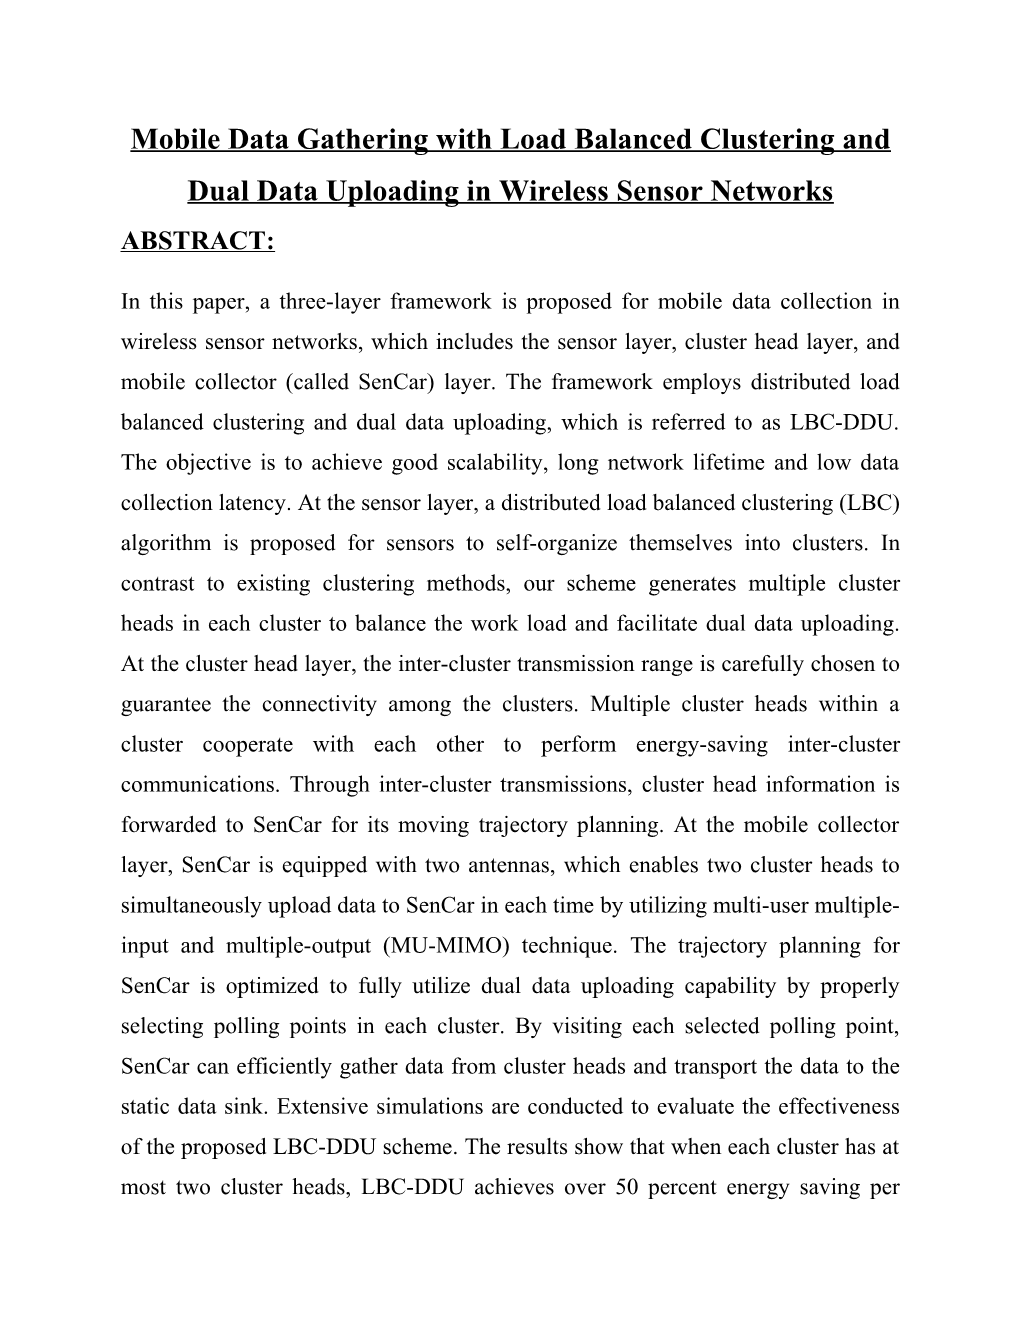 Mobile Data Gathering with Load Balanced Clustering and Dual Data Uploading in Wireless